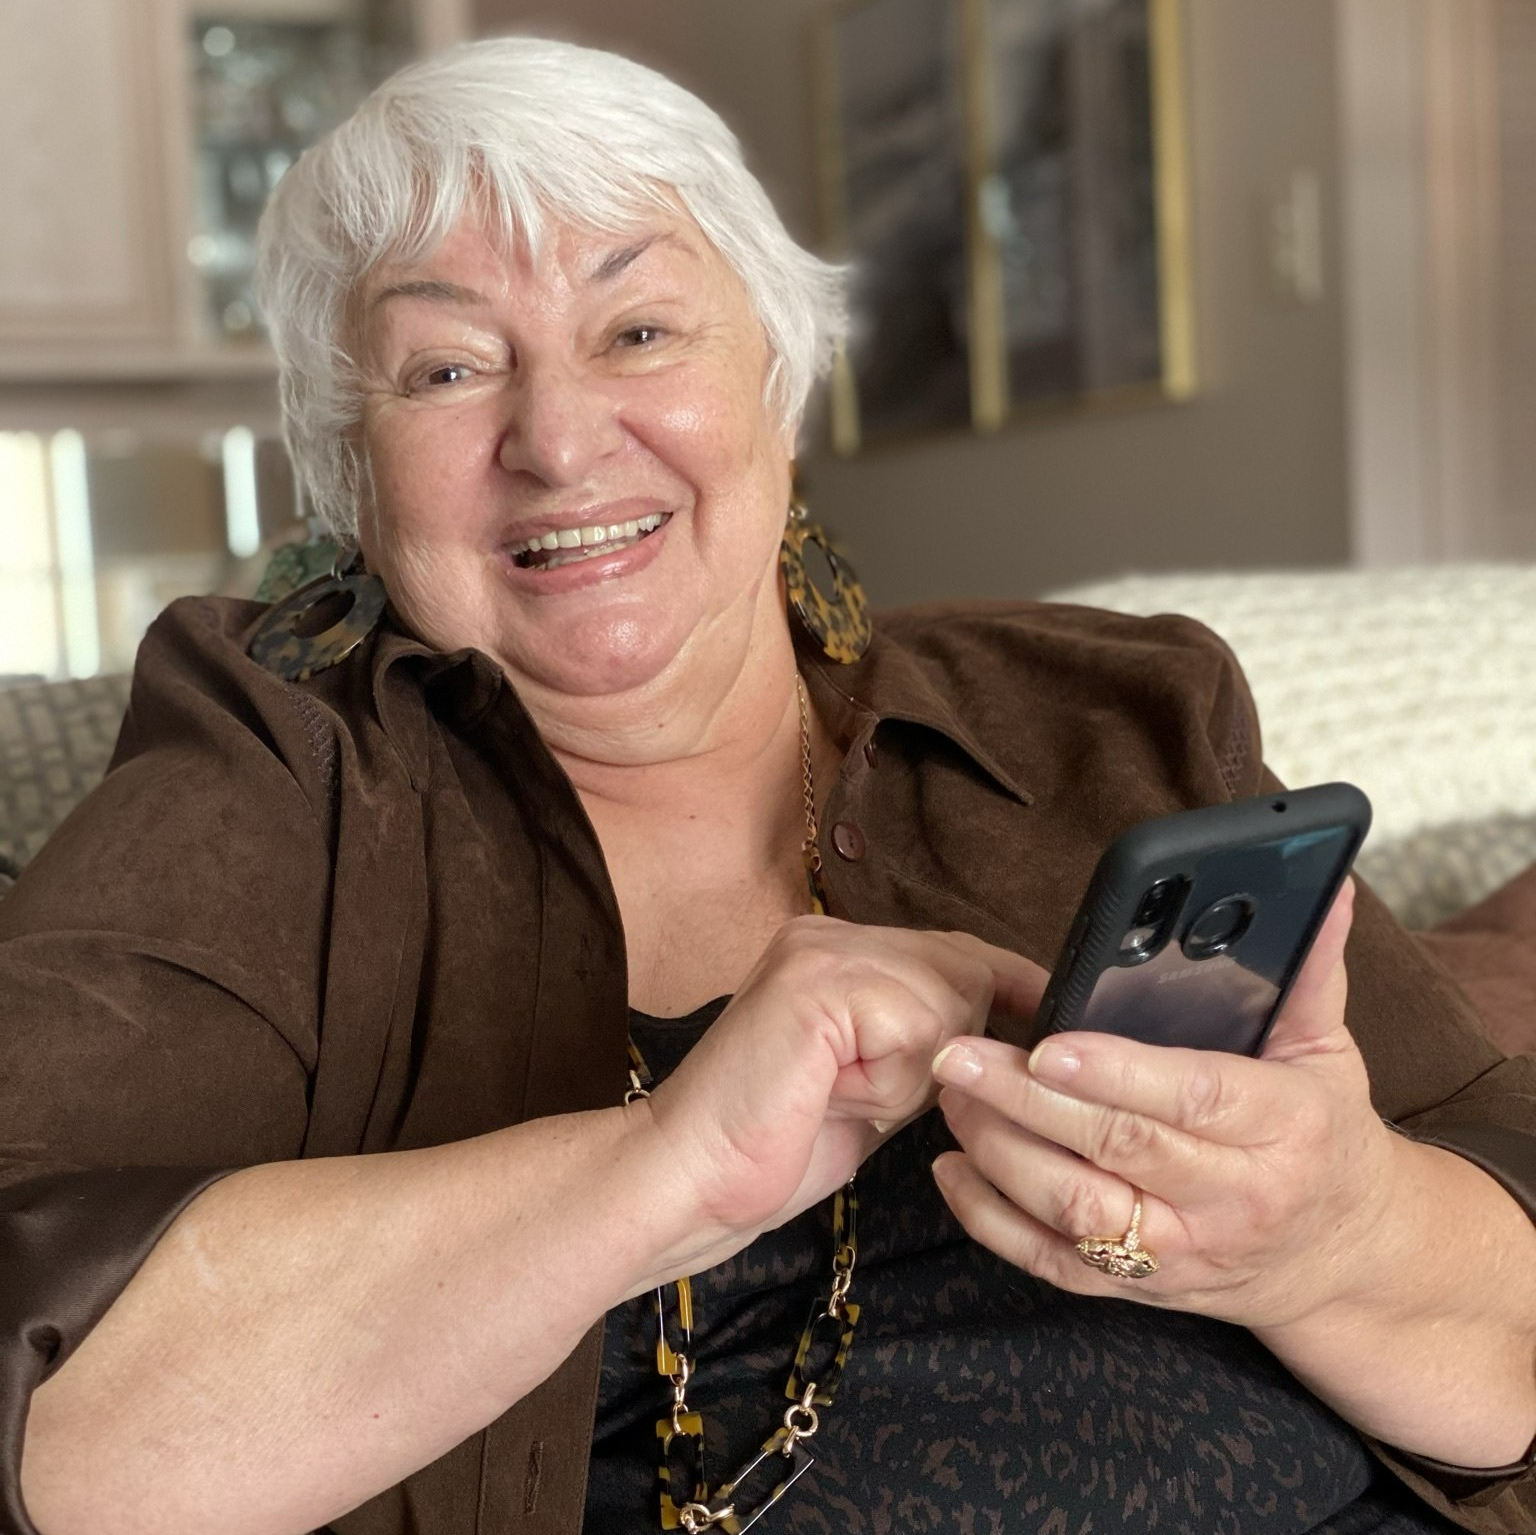 retired lady scrolling through her phone on the couch in her independent living apartment